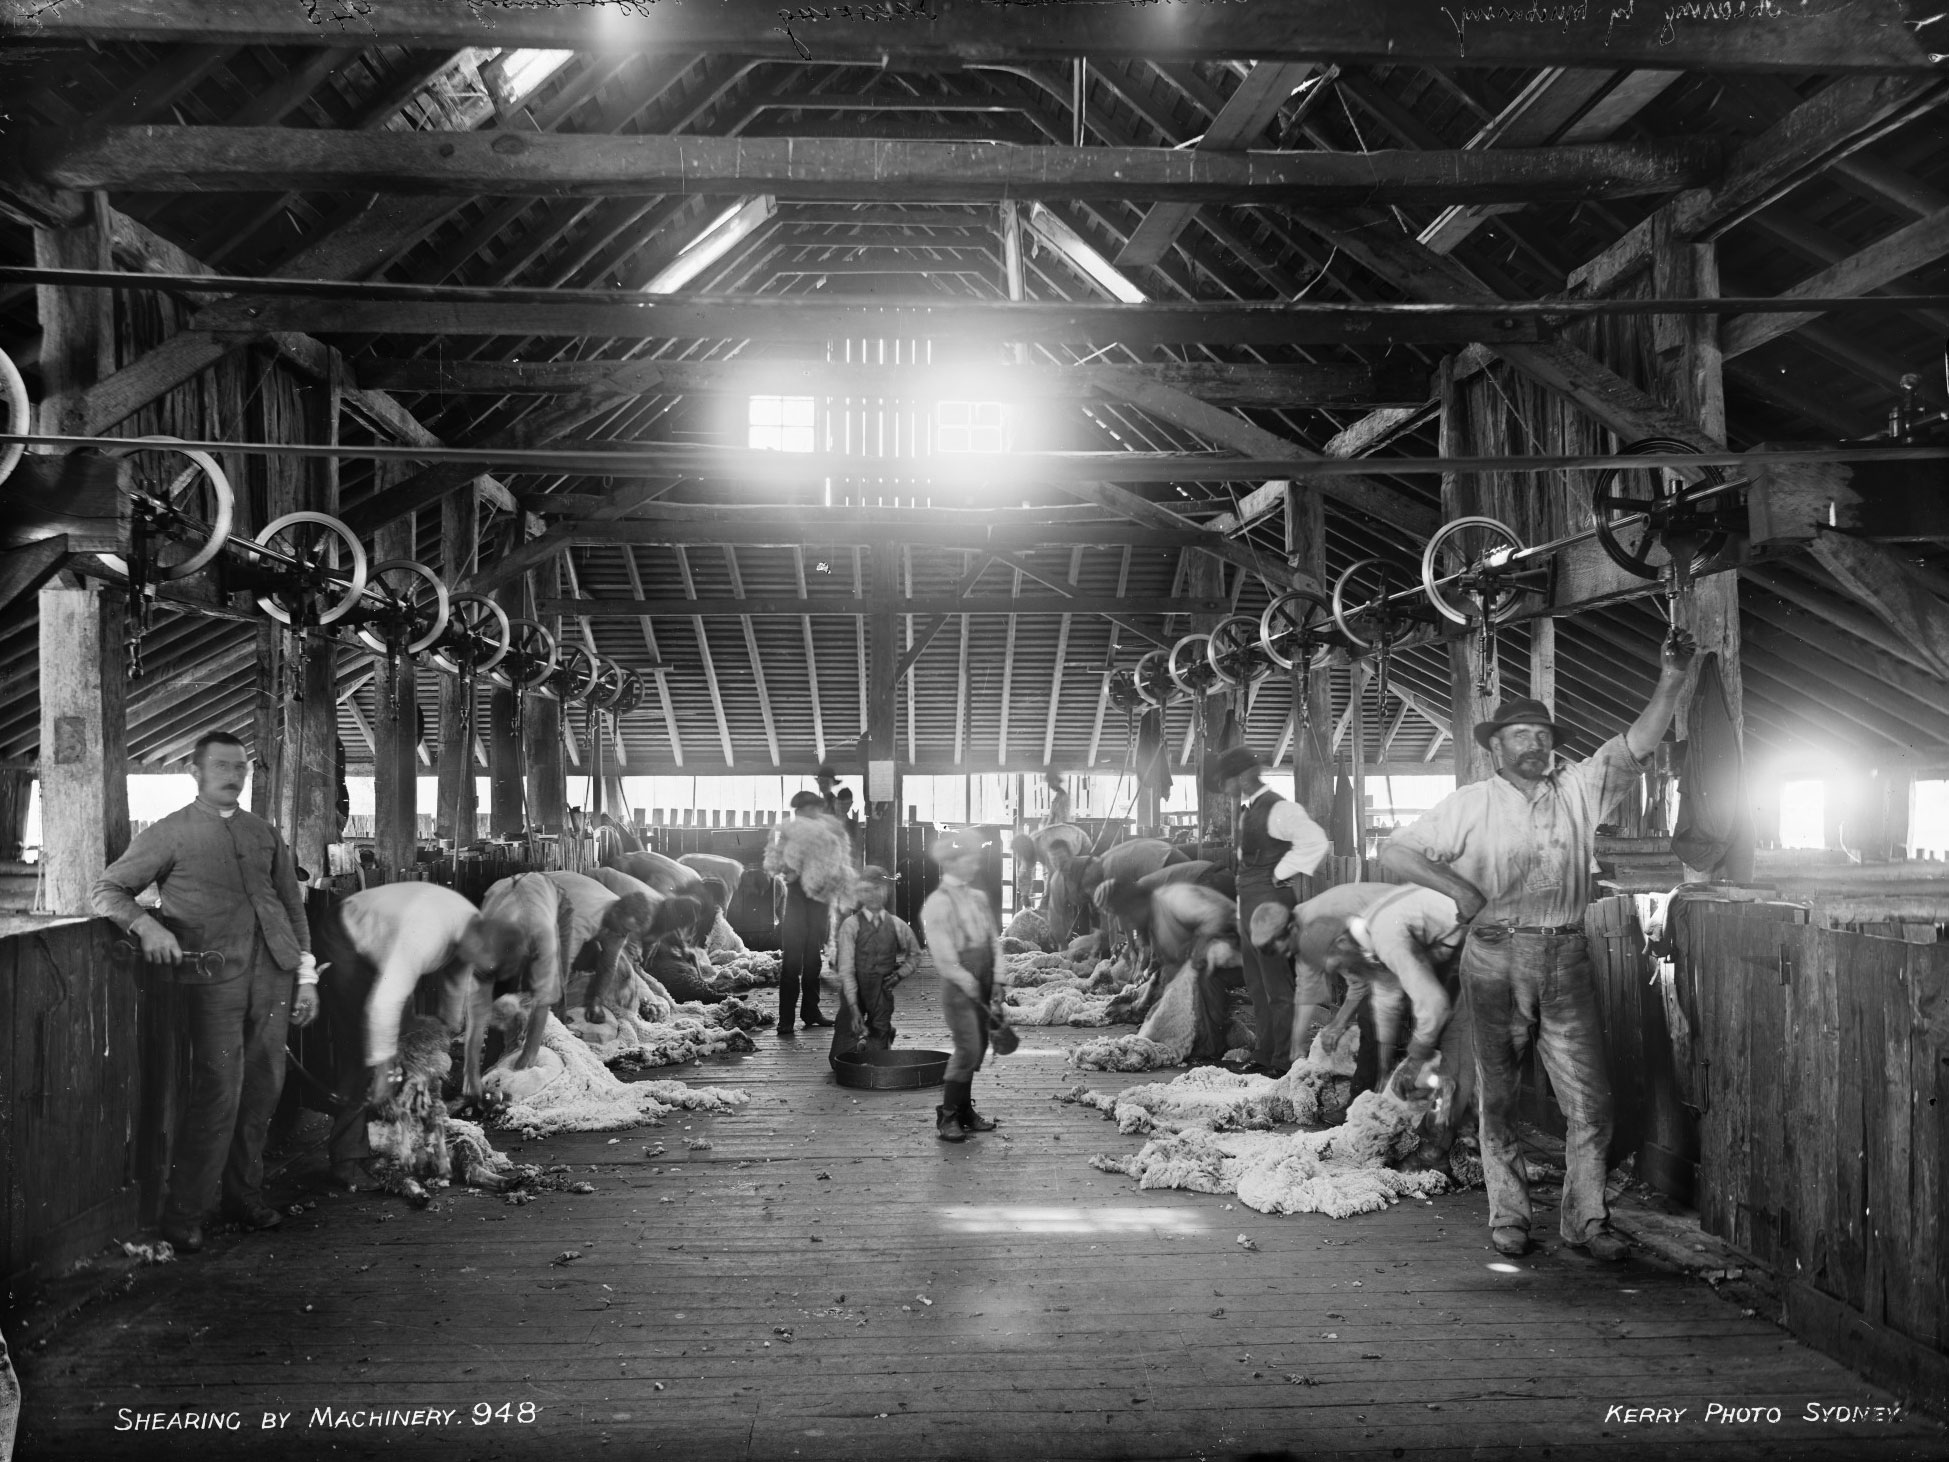 Shearing by machinery. Photograph taken between 1890 and 1917.